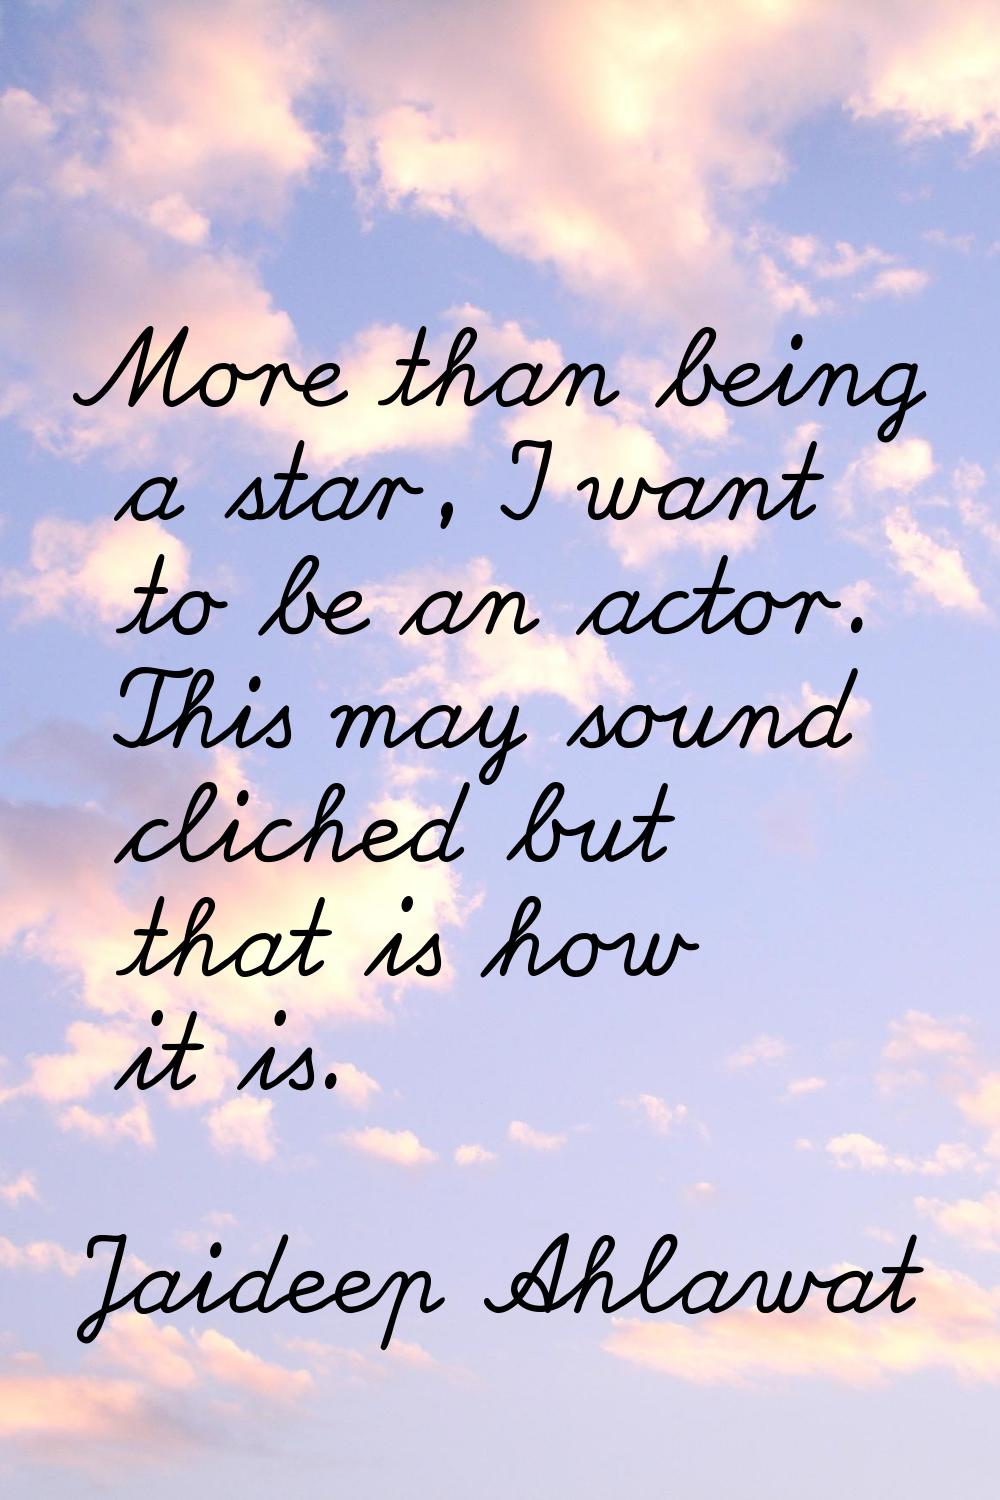 More than being a star, I want to be an actor. This may sound cliched but that is how it is.